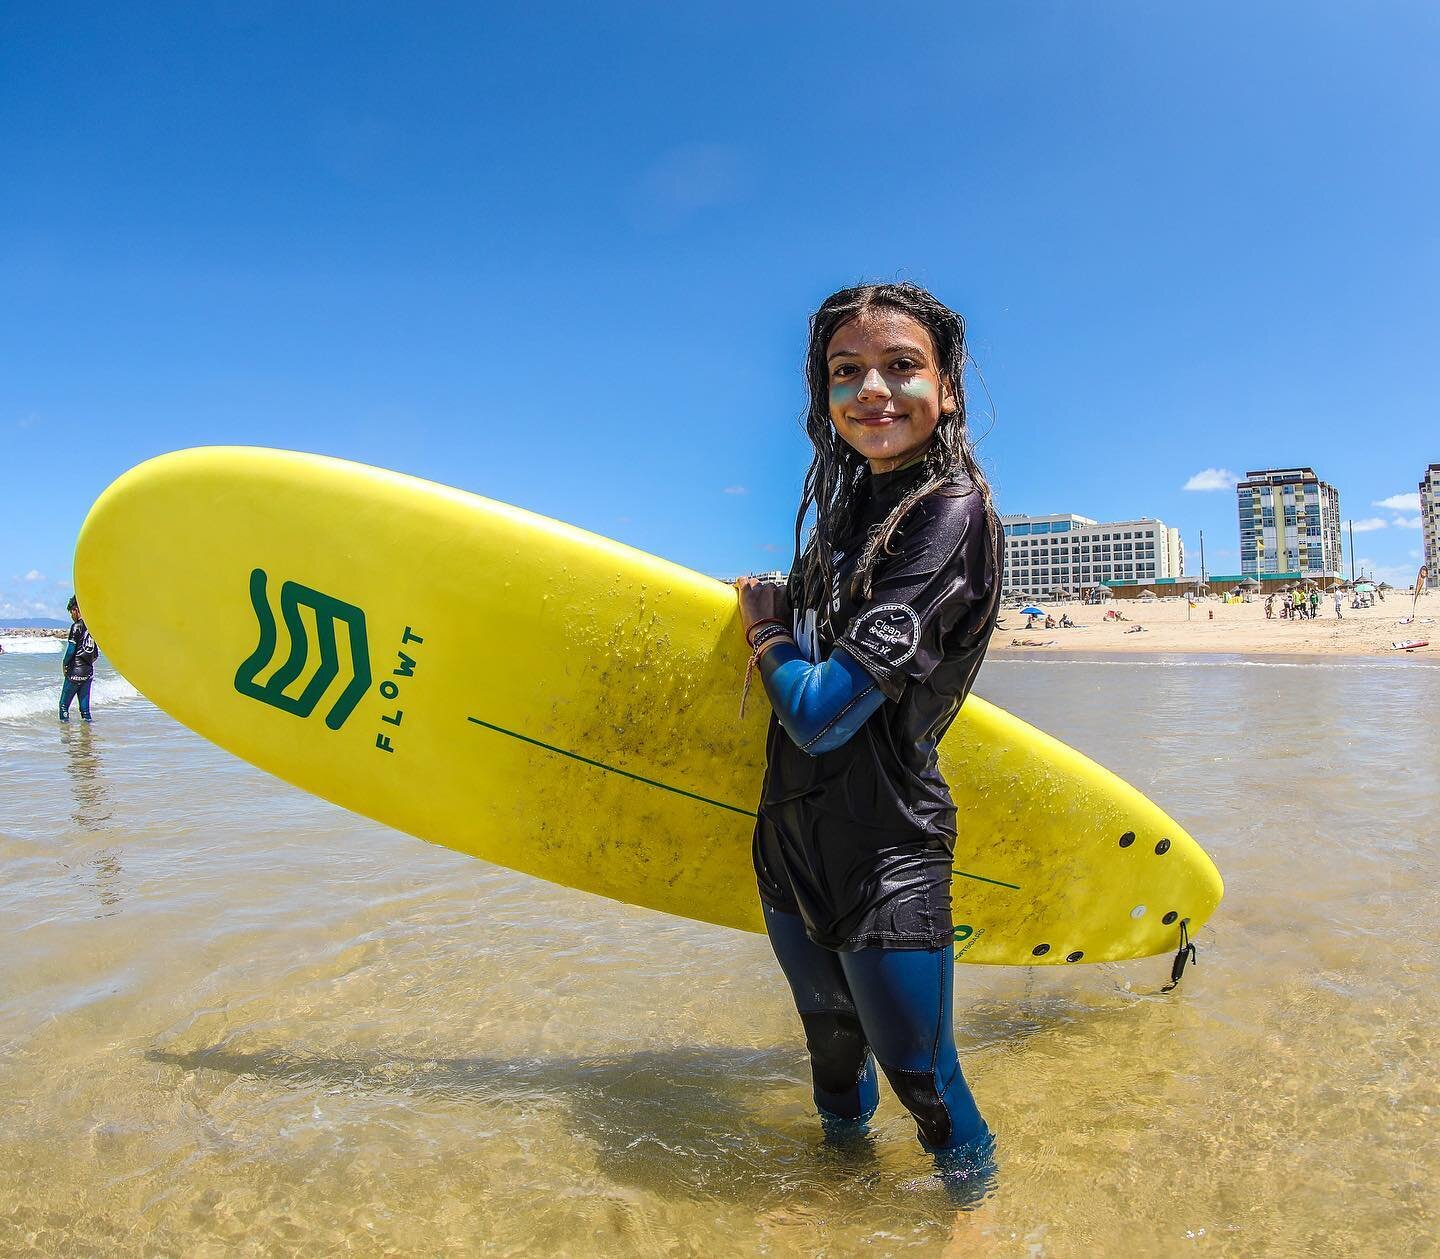 She&rsquo;s ready, and how about you?
Stop by our surf school and come surf with us every day. 🏄🏼🌊🧡🤙🏻

Click by 📸 @nfphotography78 

#surf#sunset#beachlife#summer#surfboard#sup#lifestyle#lisbon#costadacaparica#surfschool#surflessons#standuppad